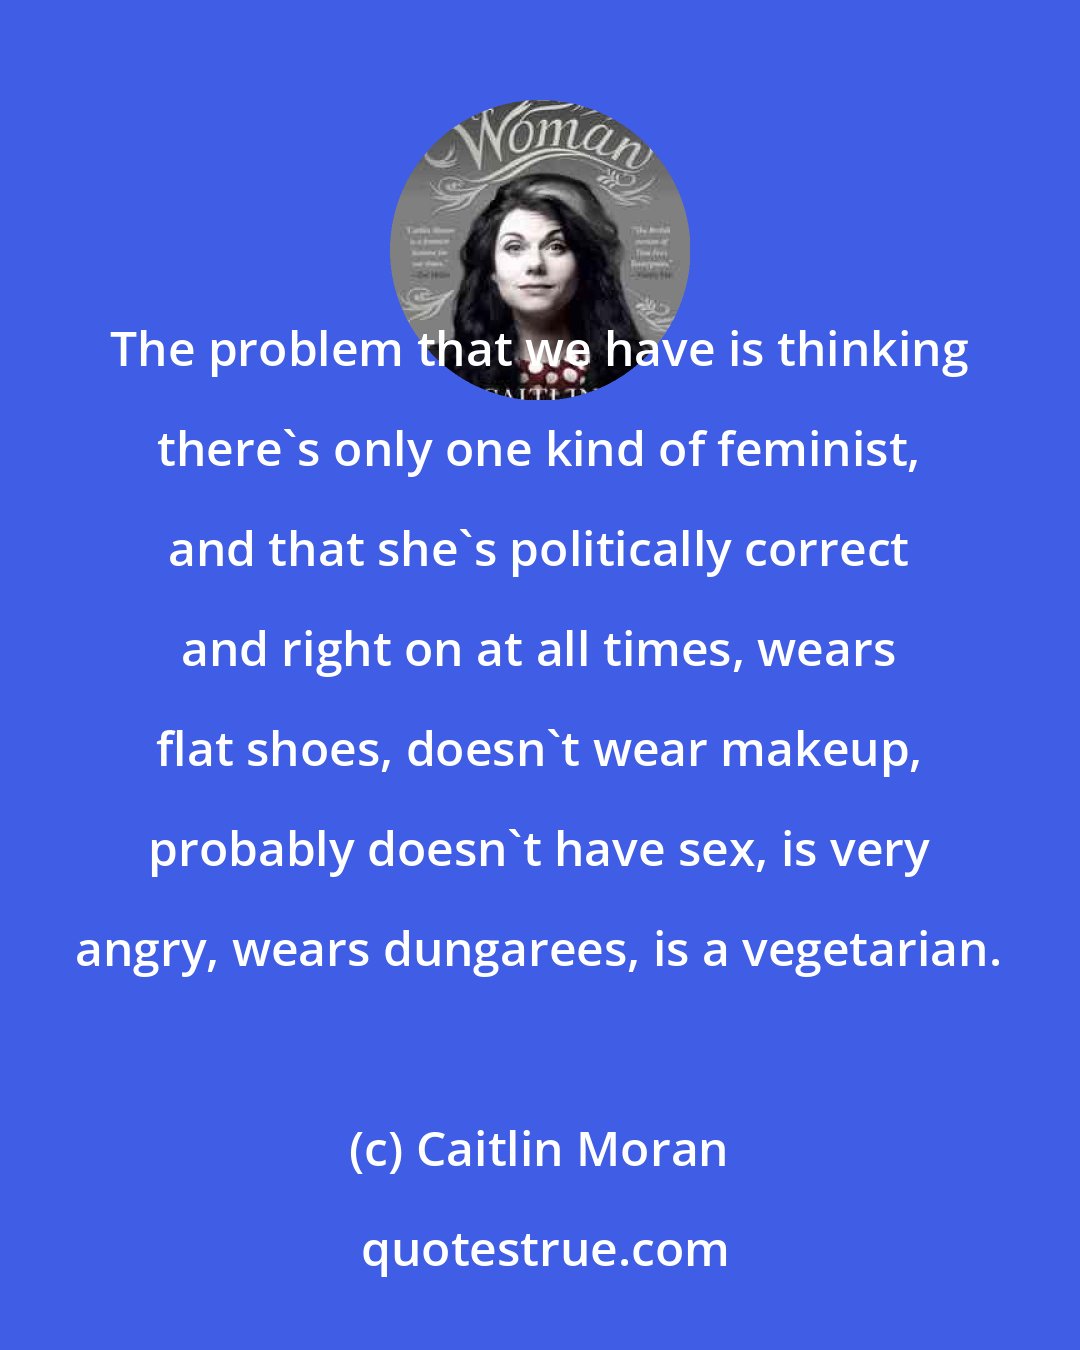 Caitlin Moran: The problem that we have is thinking there's only one kind of feminist, and that she's politically correct and right on at all times, wears flat shoes, doesn't wear makeup, probably doesn't have sex, is very angry, wears dungarees, is a vegetarian.